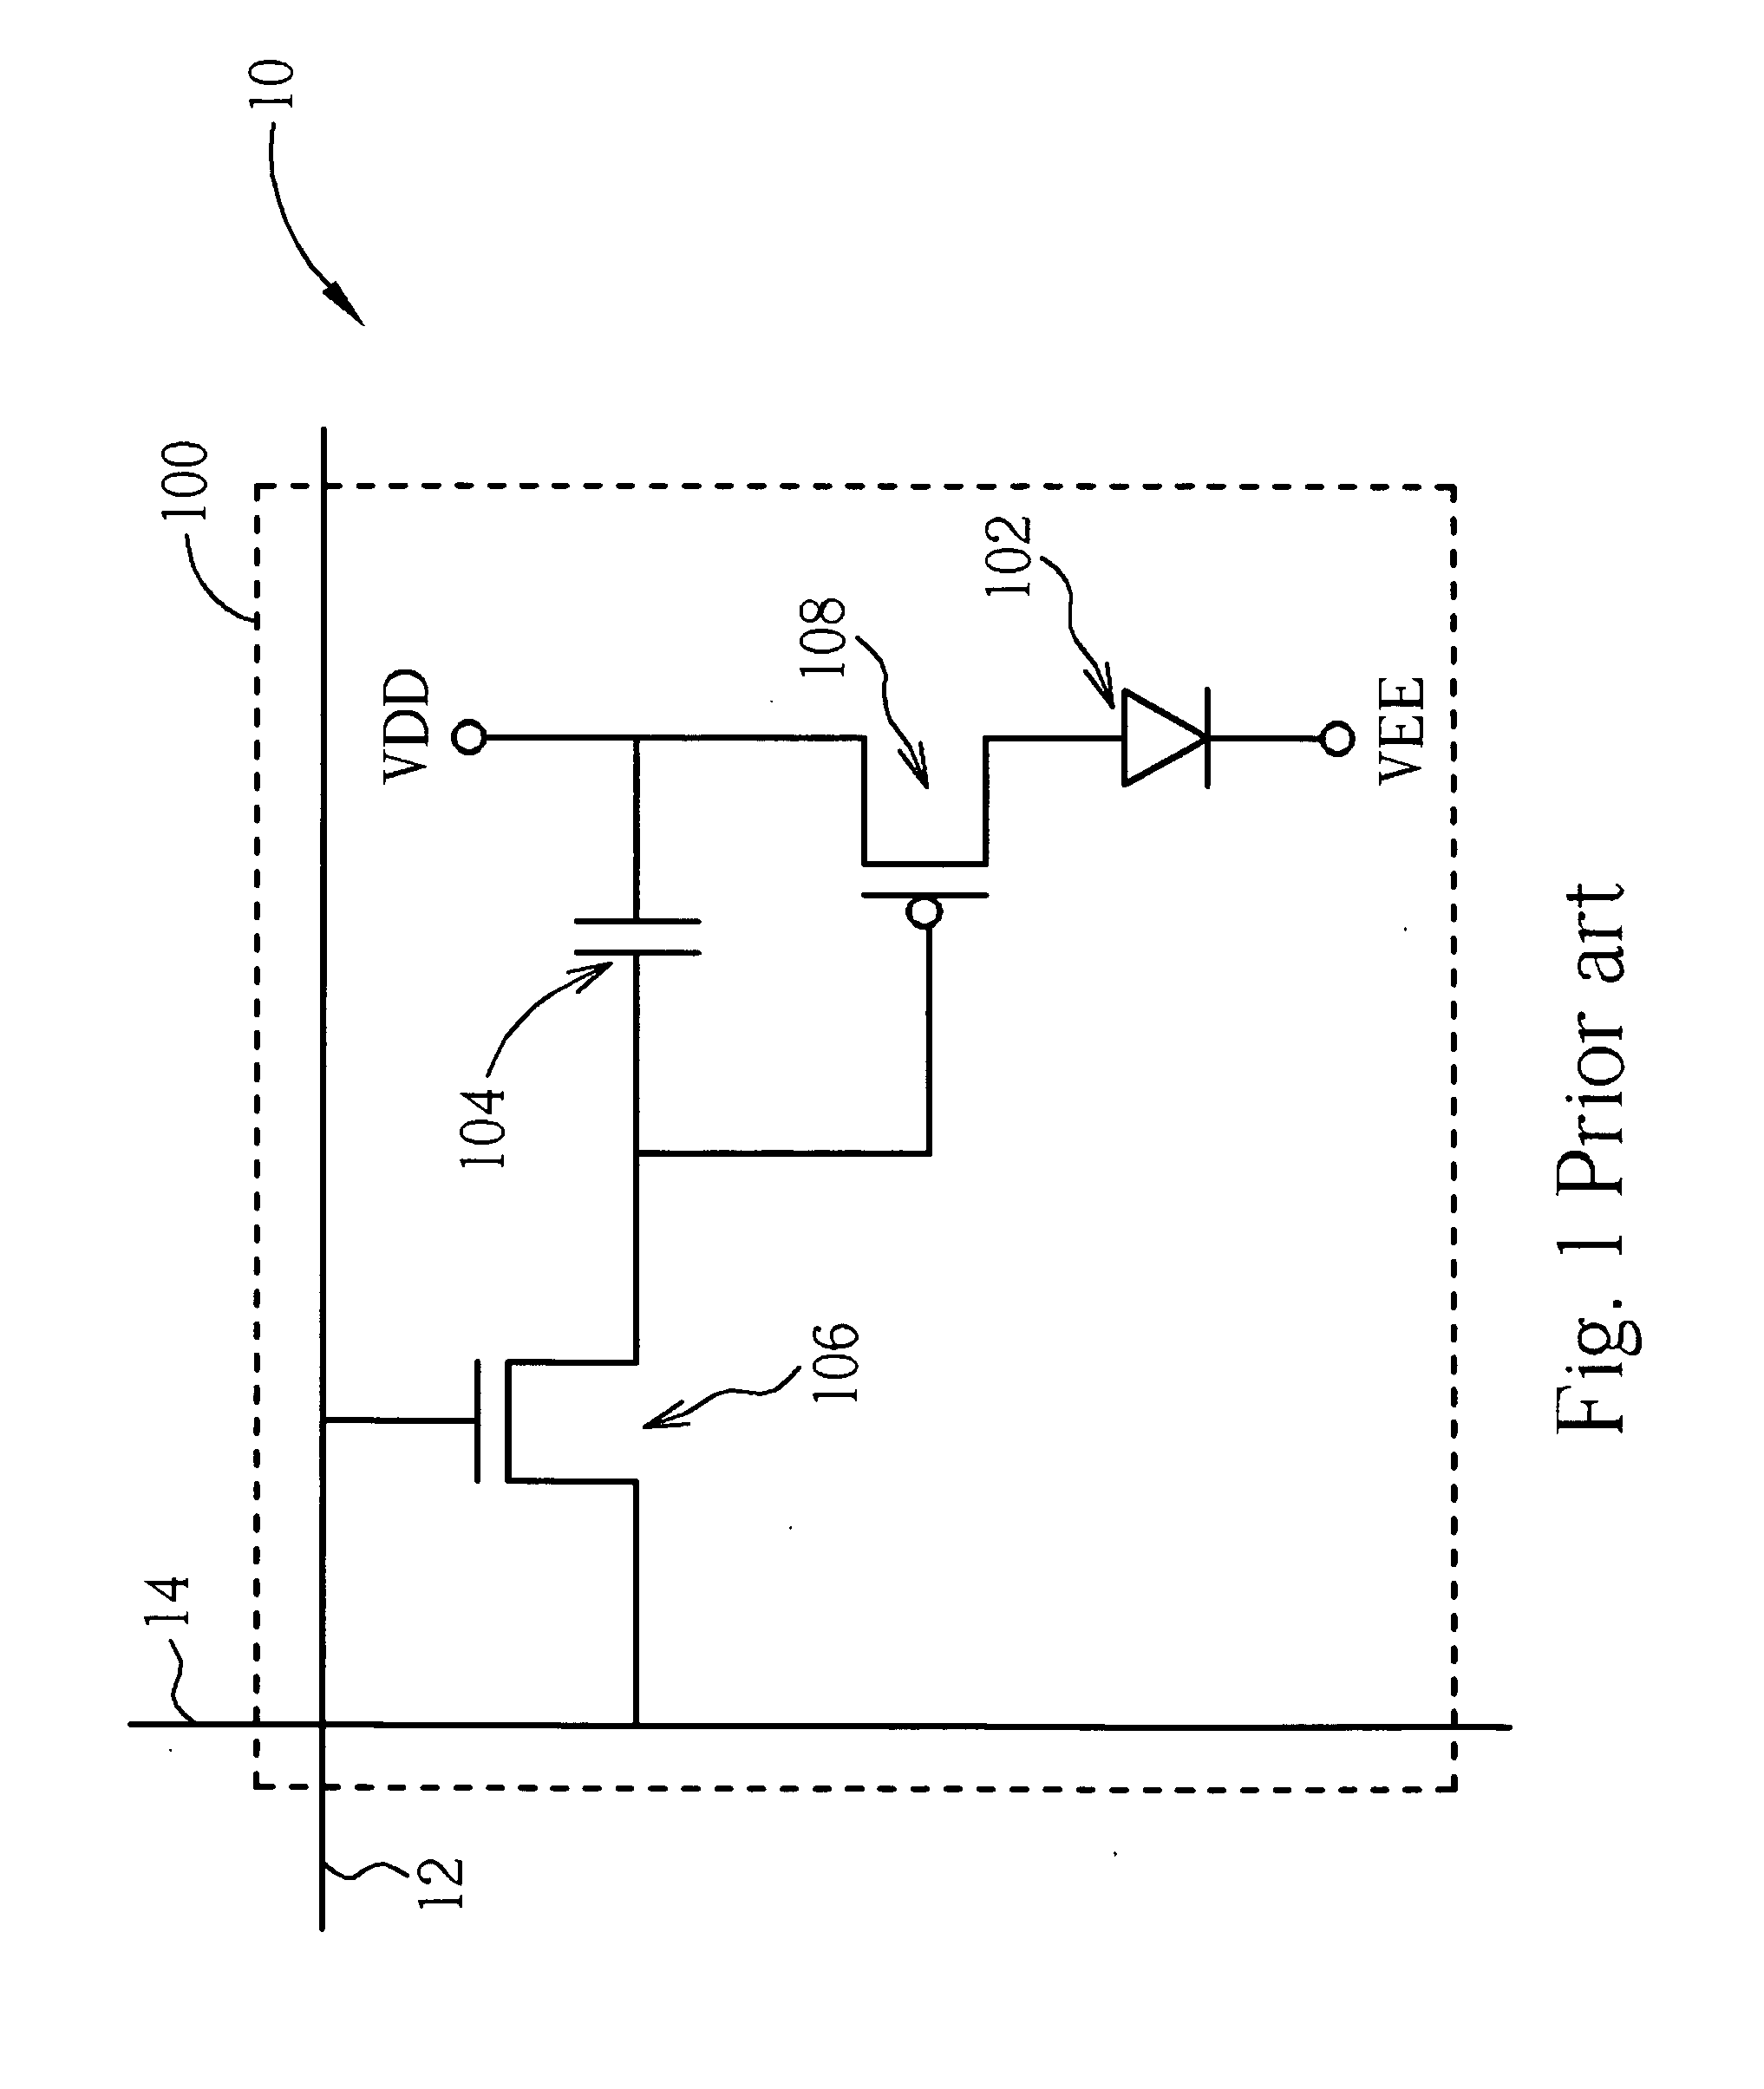 Systems for displaying images involving reduced mura